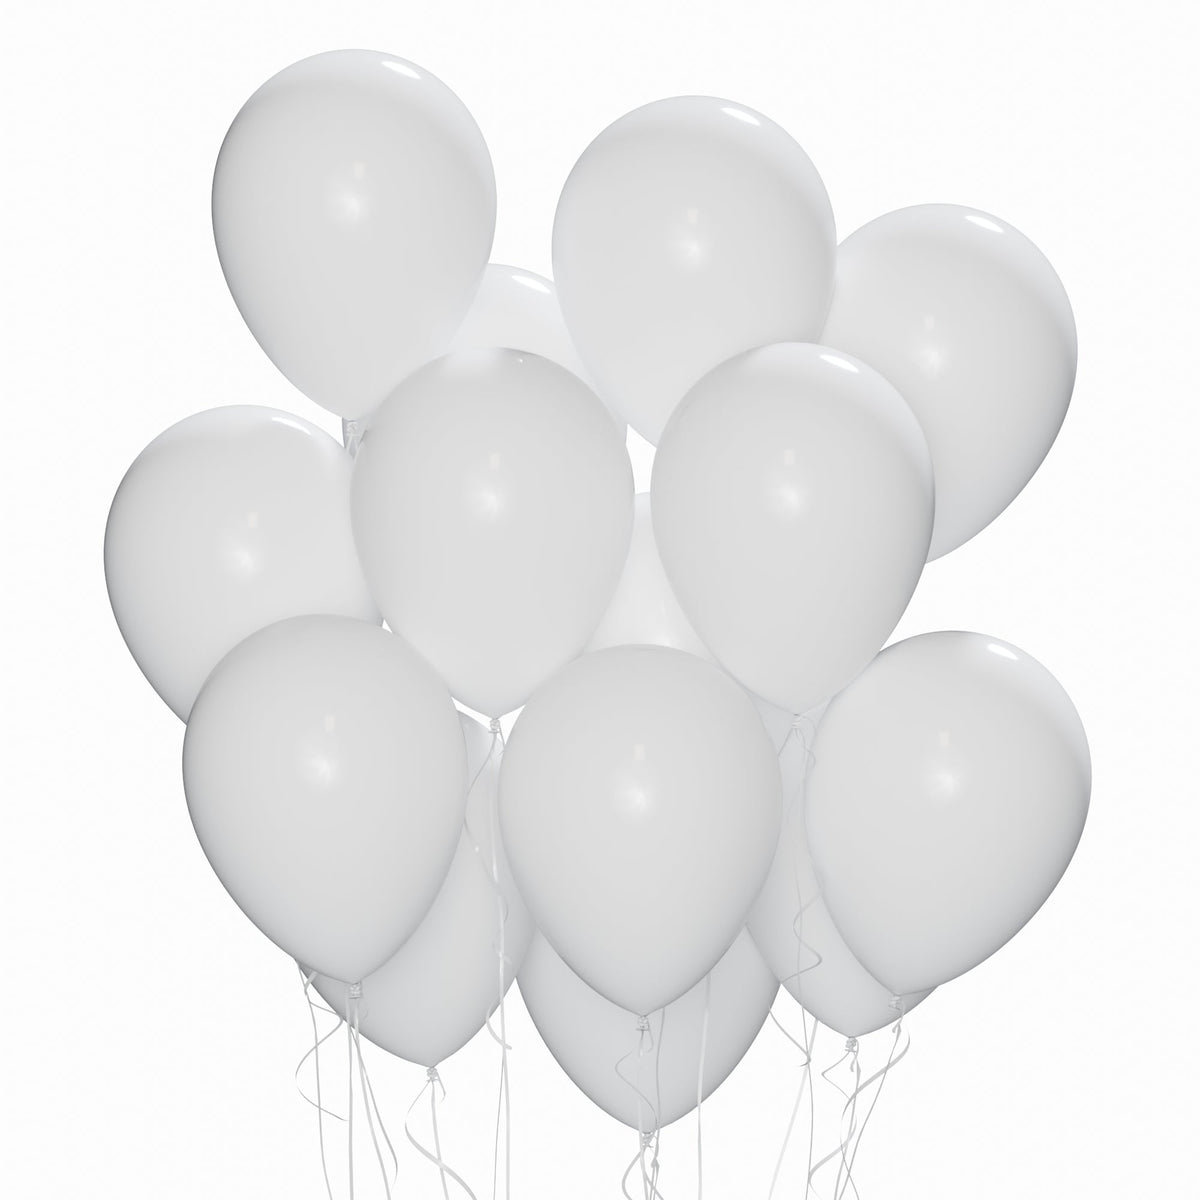 WIDE OCEAN INTERNATIONAL TRADE BEIJING CO., LTD Balloons White Latex Balloon 12 Inches, 15 Count 810064197468